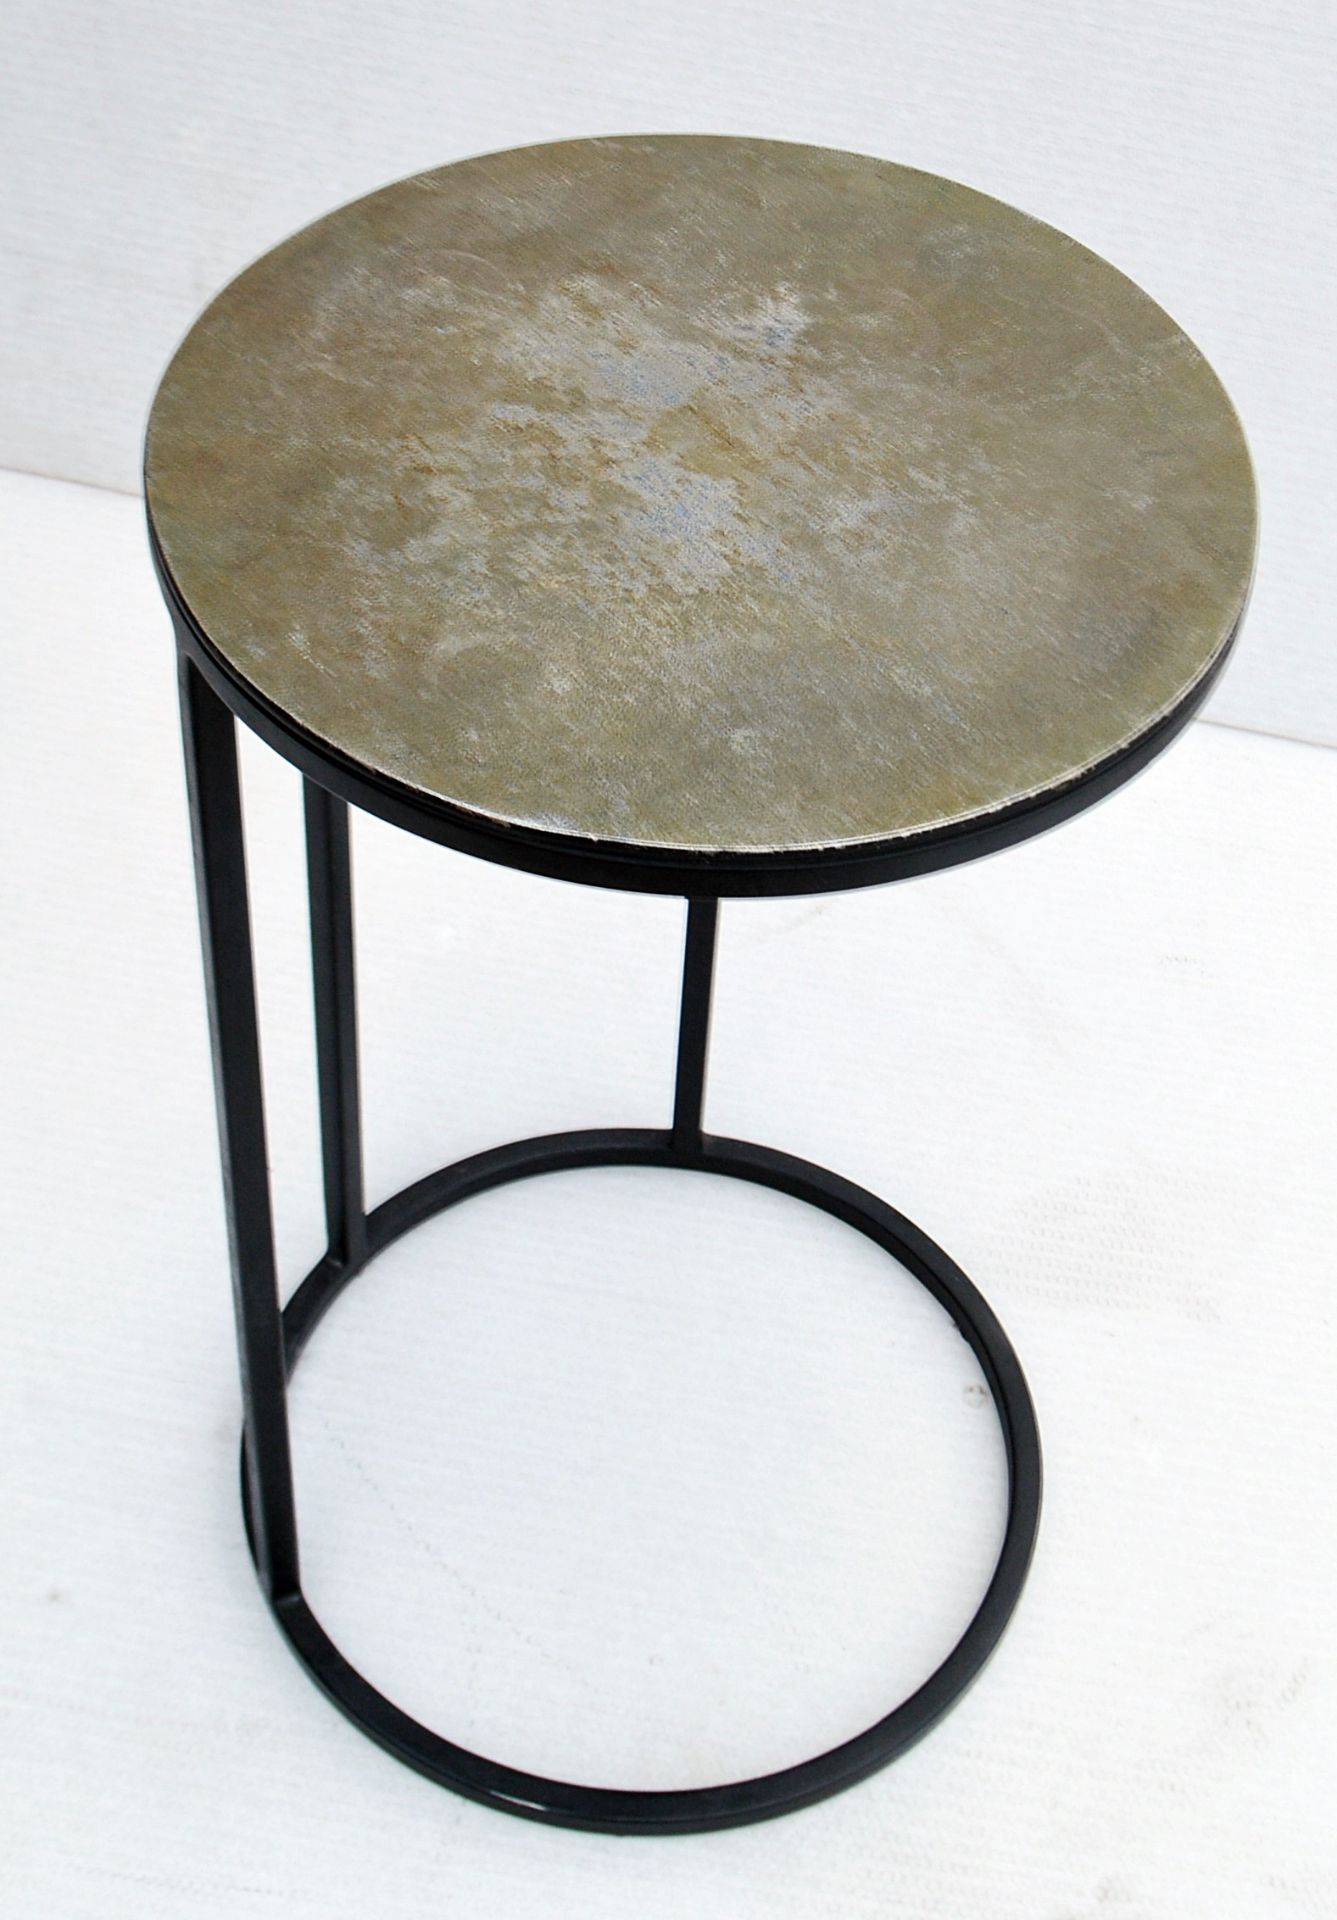 A Pair Of Elegant Circular Side Tables With Slim Metal Bases And Textured Brass Finish - Dimensions: - Image 4 of 4